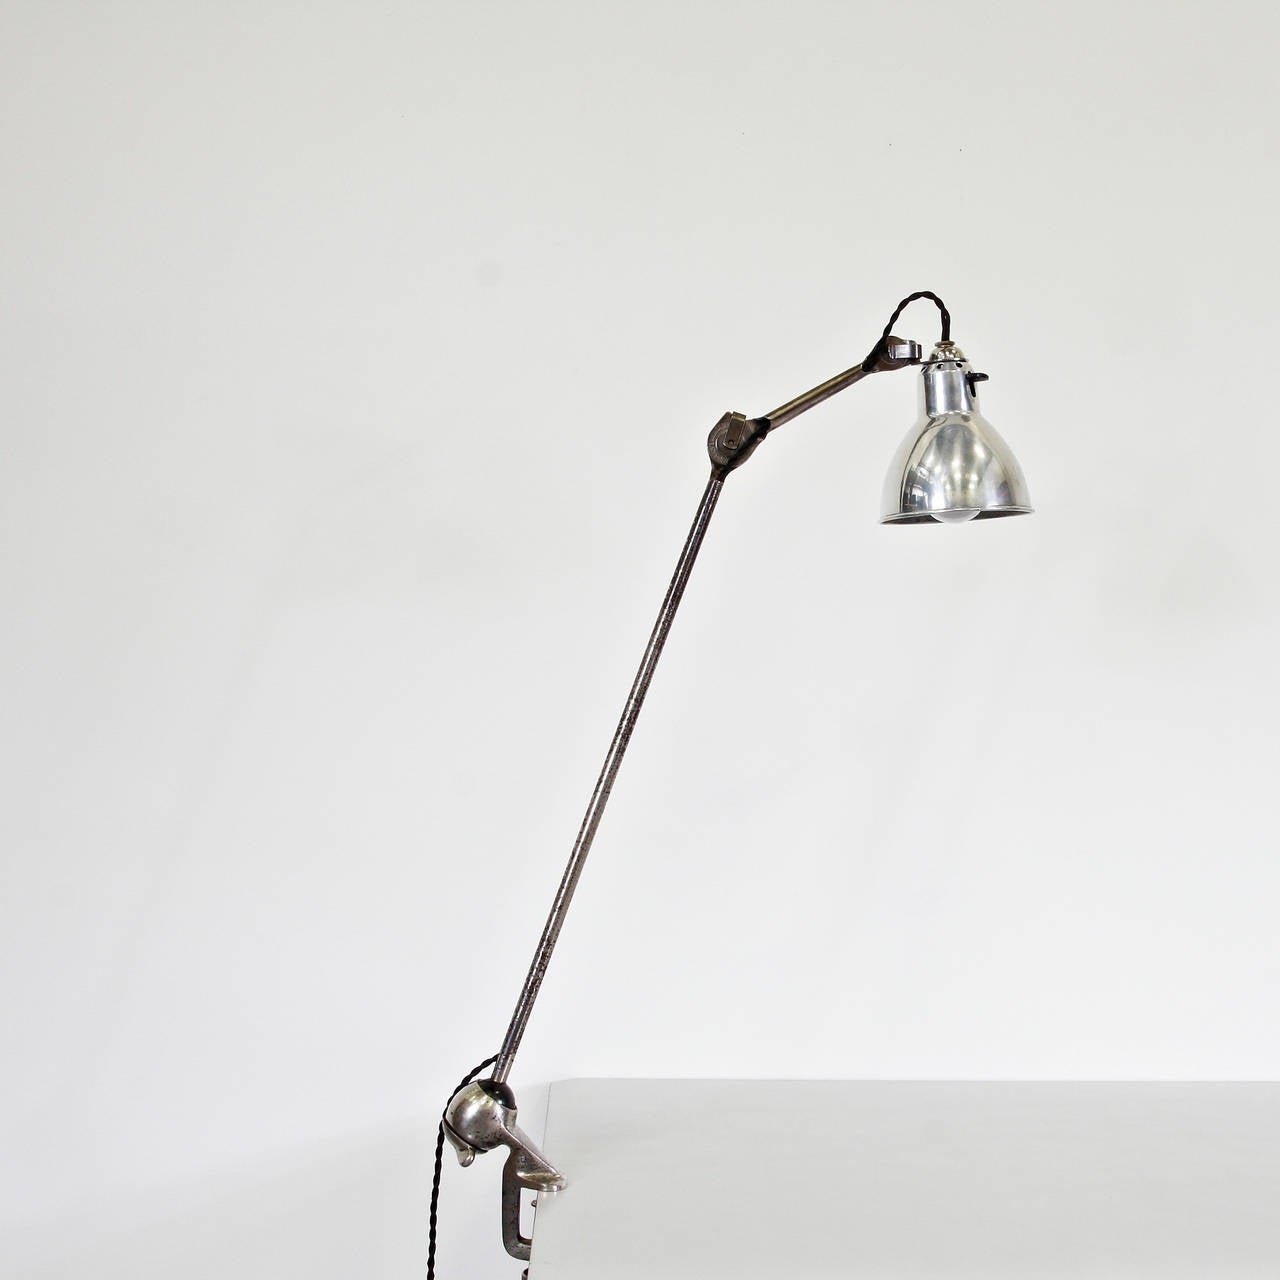 Table Lamp designed by Bernard-Albin Gras.
Manuactured by Gras (France) around 1930.
Aluminium and steel.

In good original condition, with minor wear consistent with age and use, preserving a beautiful patina.

In 1922 Bernard-Albin Gras